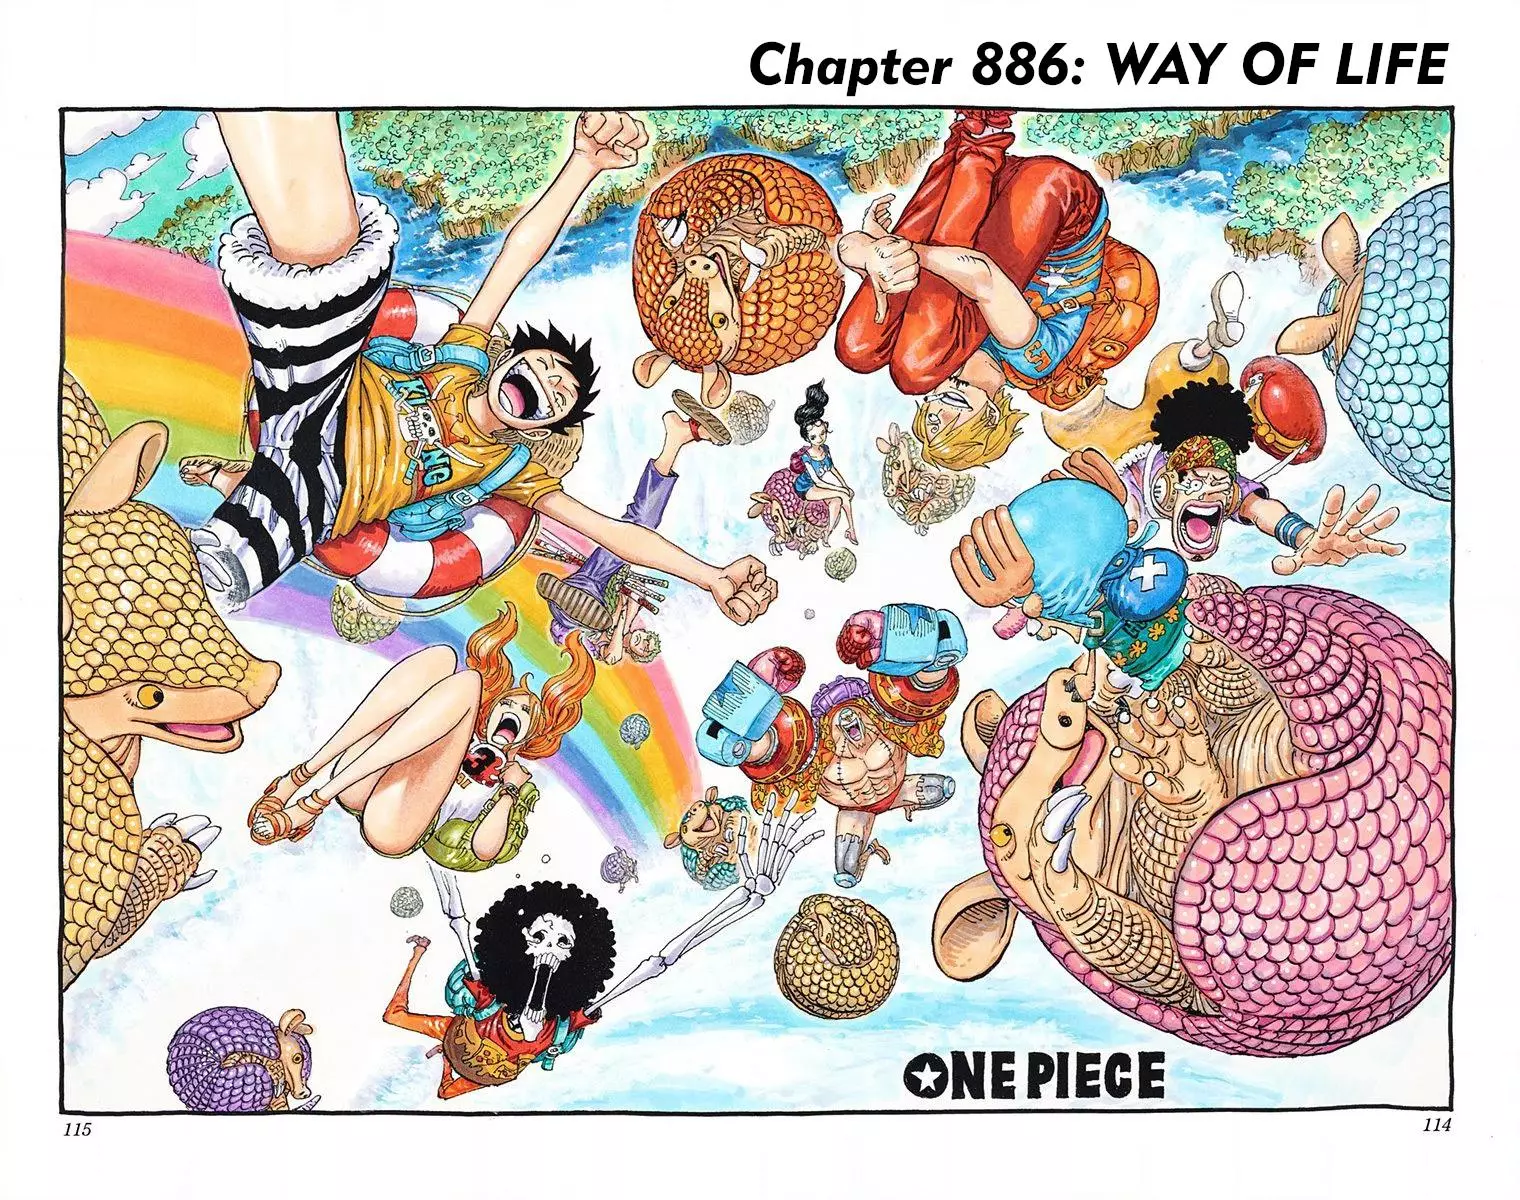 One Piece - Digital Colored Comics - 886 page 1-cf1936ad